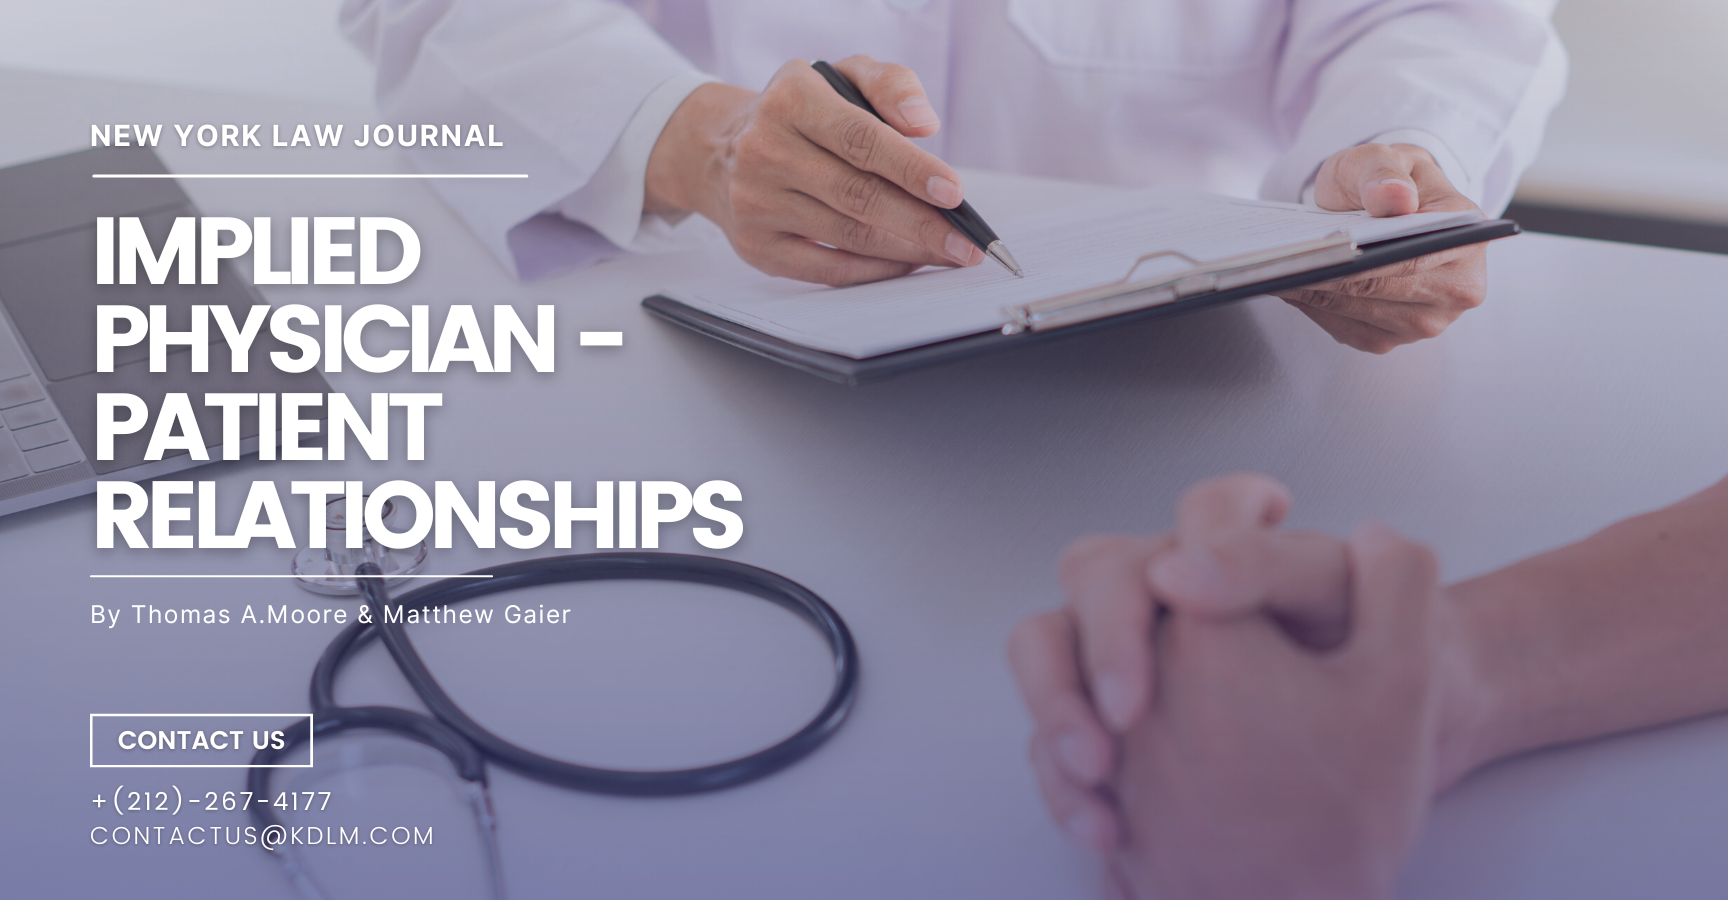 Implied Physician – Patient Relationships